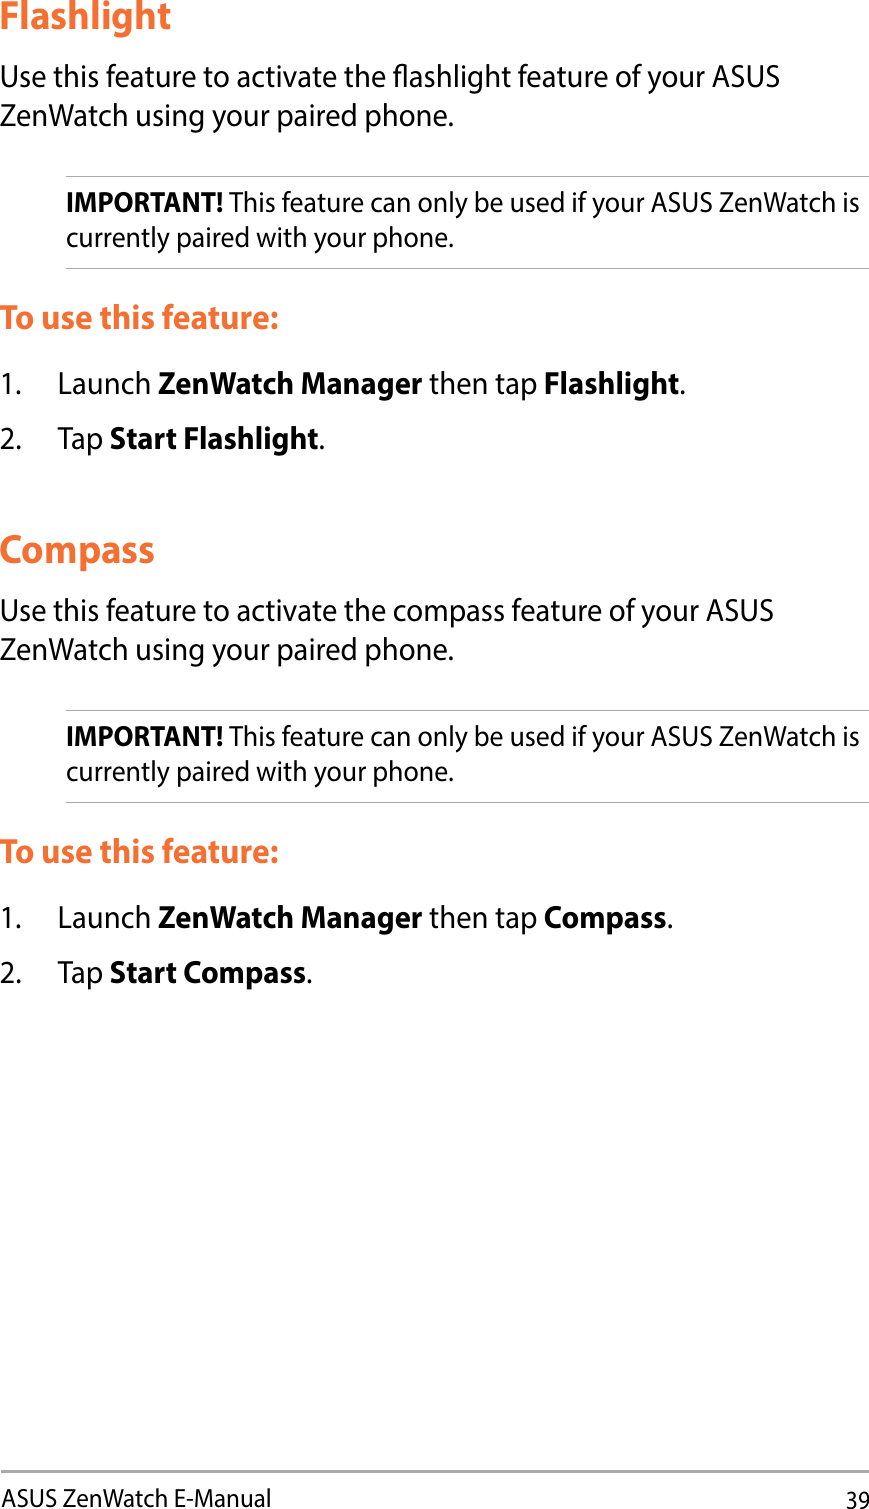 39ASUS ZenWatch E-ManualFlashlightUse this feature to activate the ashlight feature of your ASUS ZenWatch using your paired phone. IMPORTANT! This feature can only be used if your ASUS ZenWatch is currently paired with your phone.To use this feature:1. Launch ZenWatch Manager then tap Flashlight.2. Tap Start Flashlight.CompassUse this feature to activate the compass feature of your ASUS ZenWatch using your paired phone. IMPORTANT! This feature can only be used if your ASUS ZenWatch is currently paired with your phone.To use this feature:1. Launch ZenWatch Manager then tap Compass.2. Tap Start Compass.